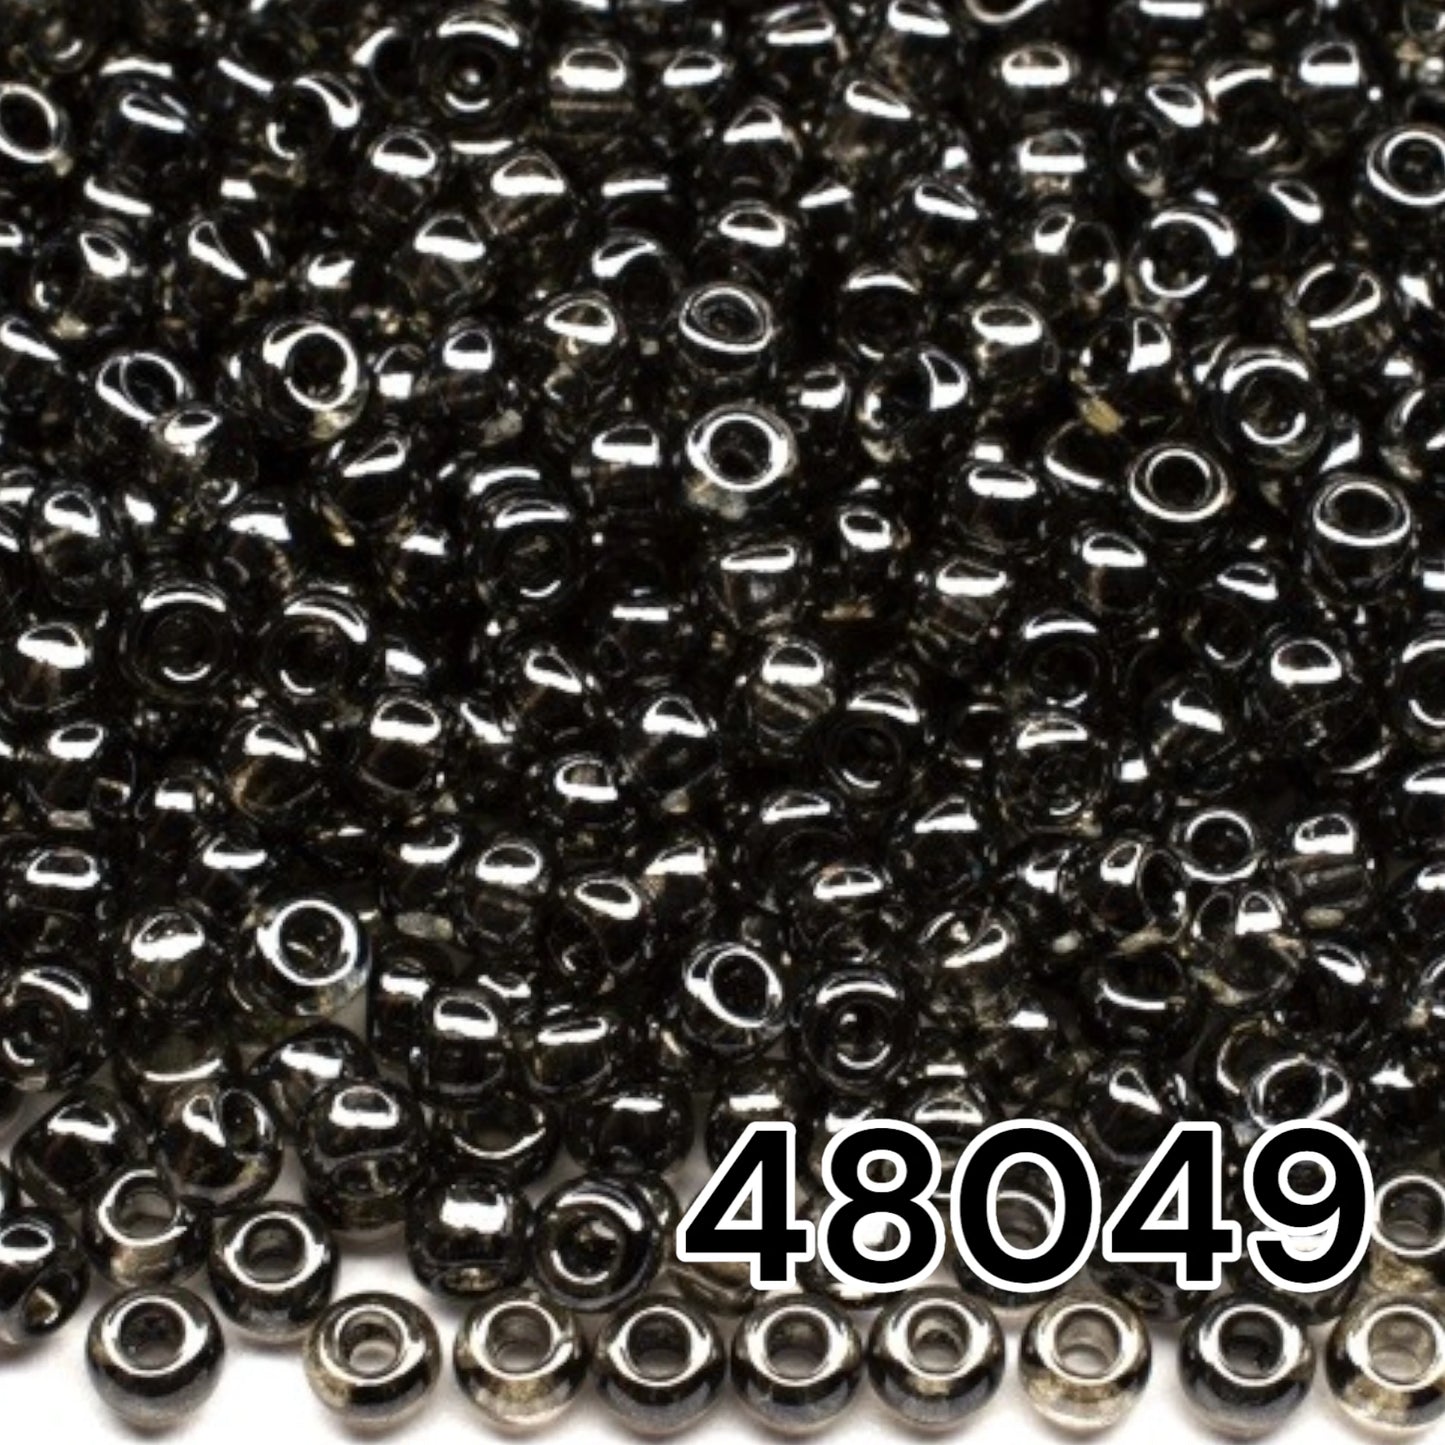 48049 Czech Seed Beads Preciosa Rocailles Crystal Color Lustered